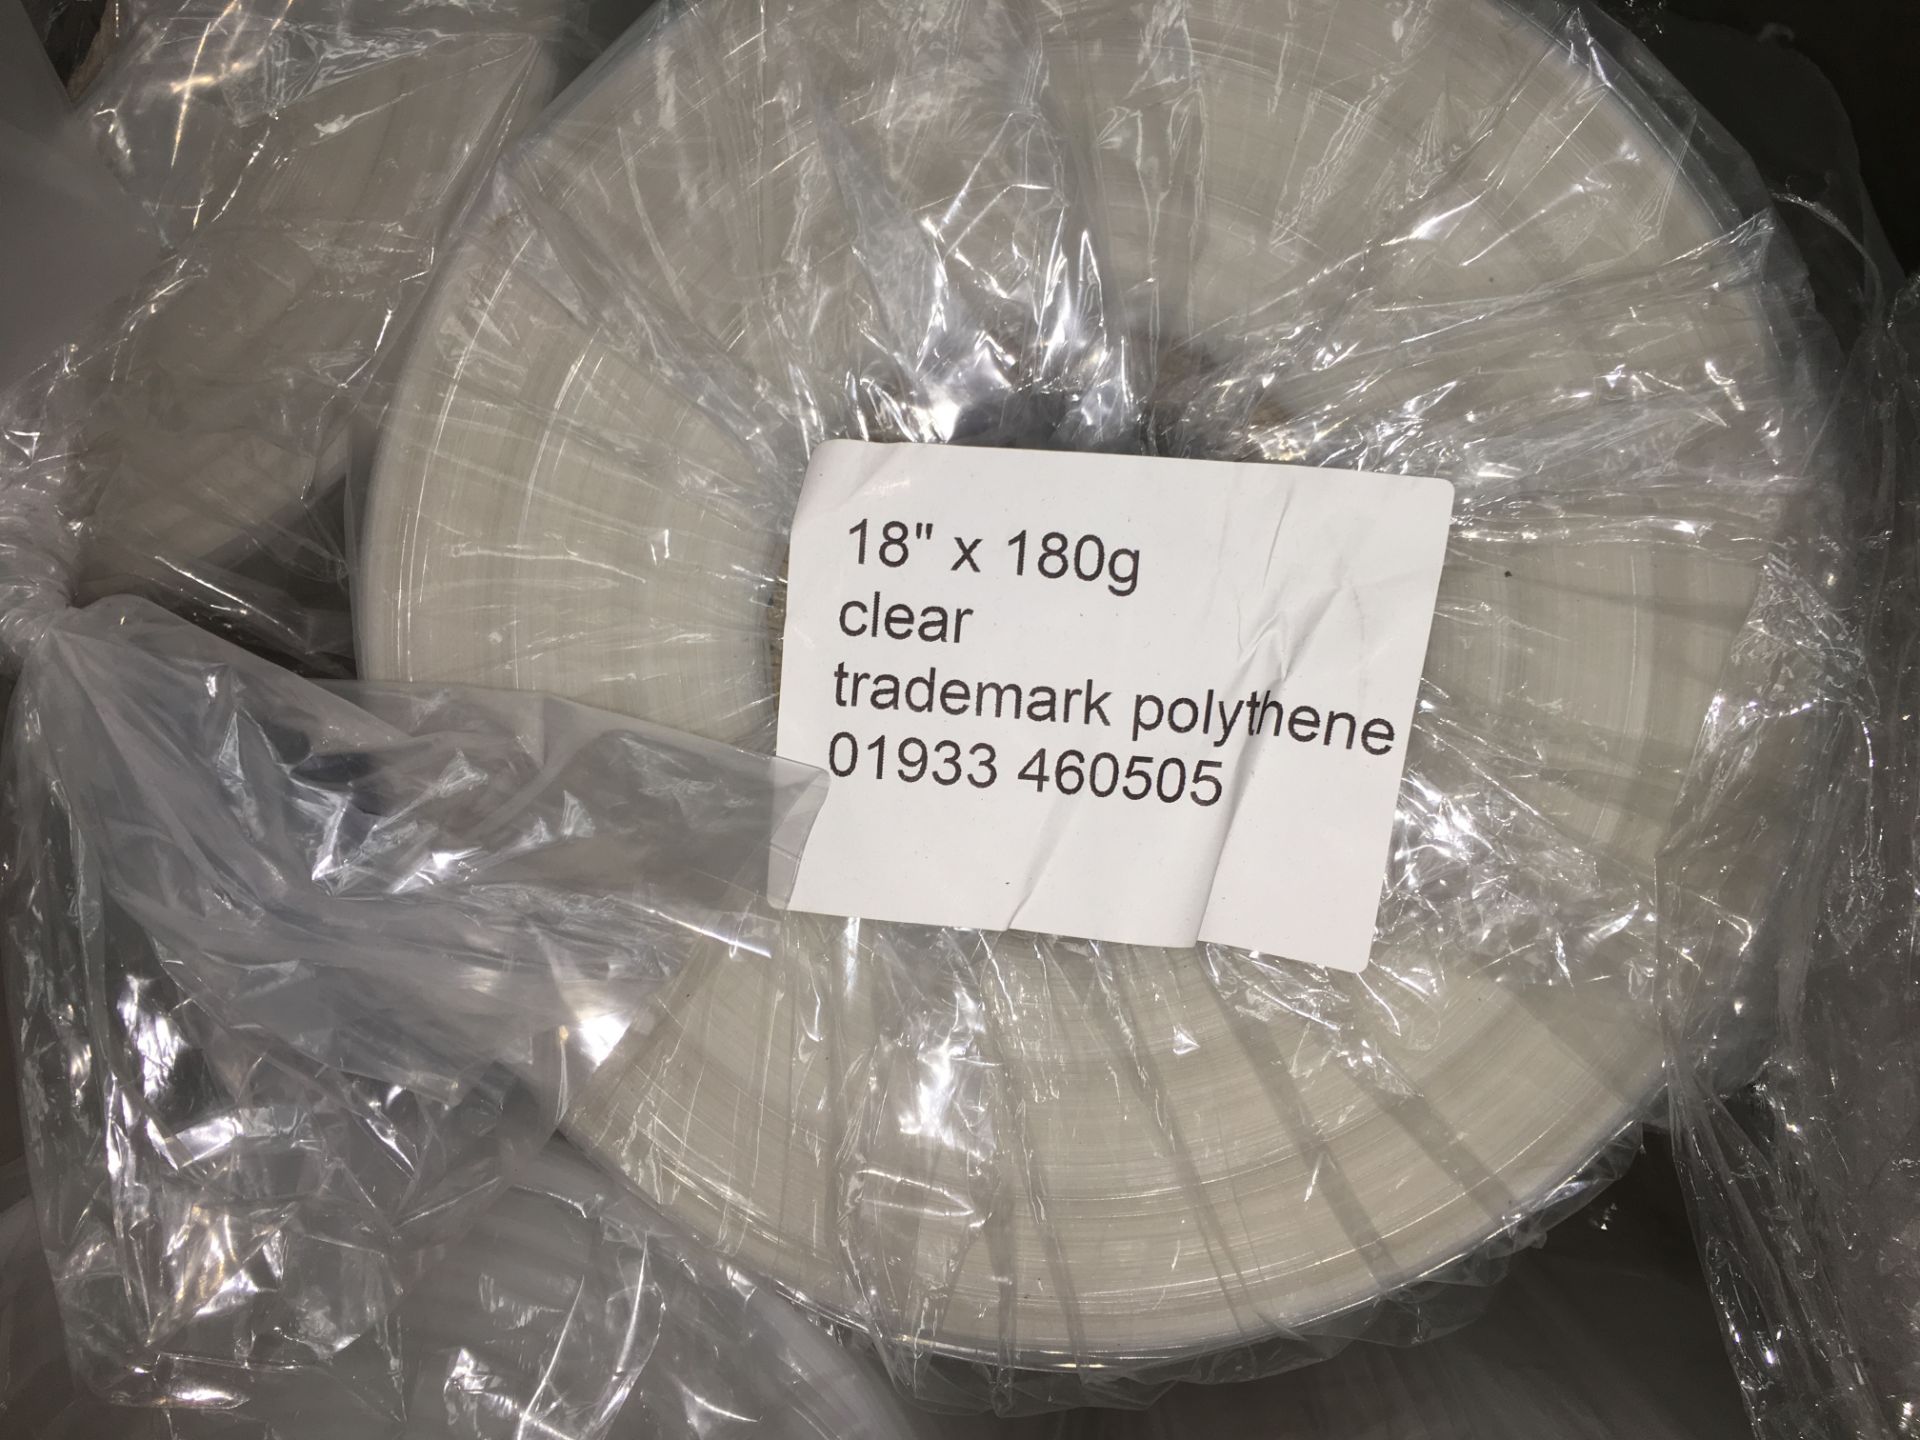 Quantity of Trademark Polythene Clear Rolls, as se - Image 2 of 2